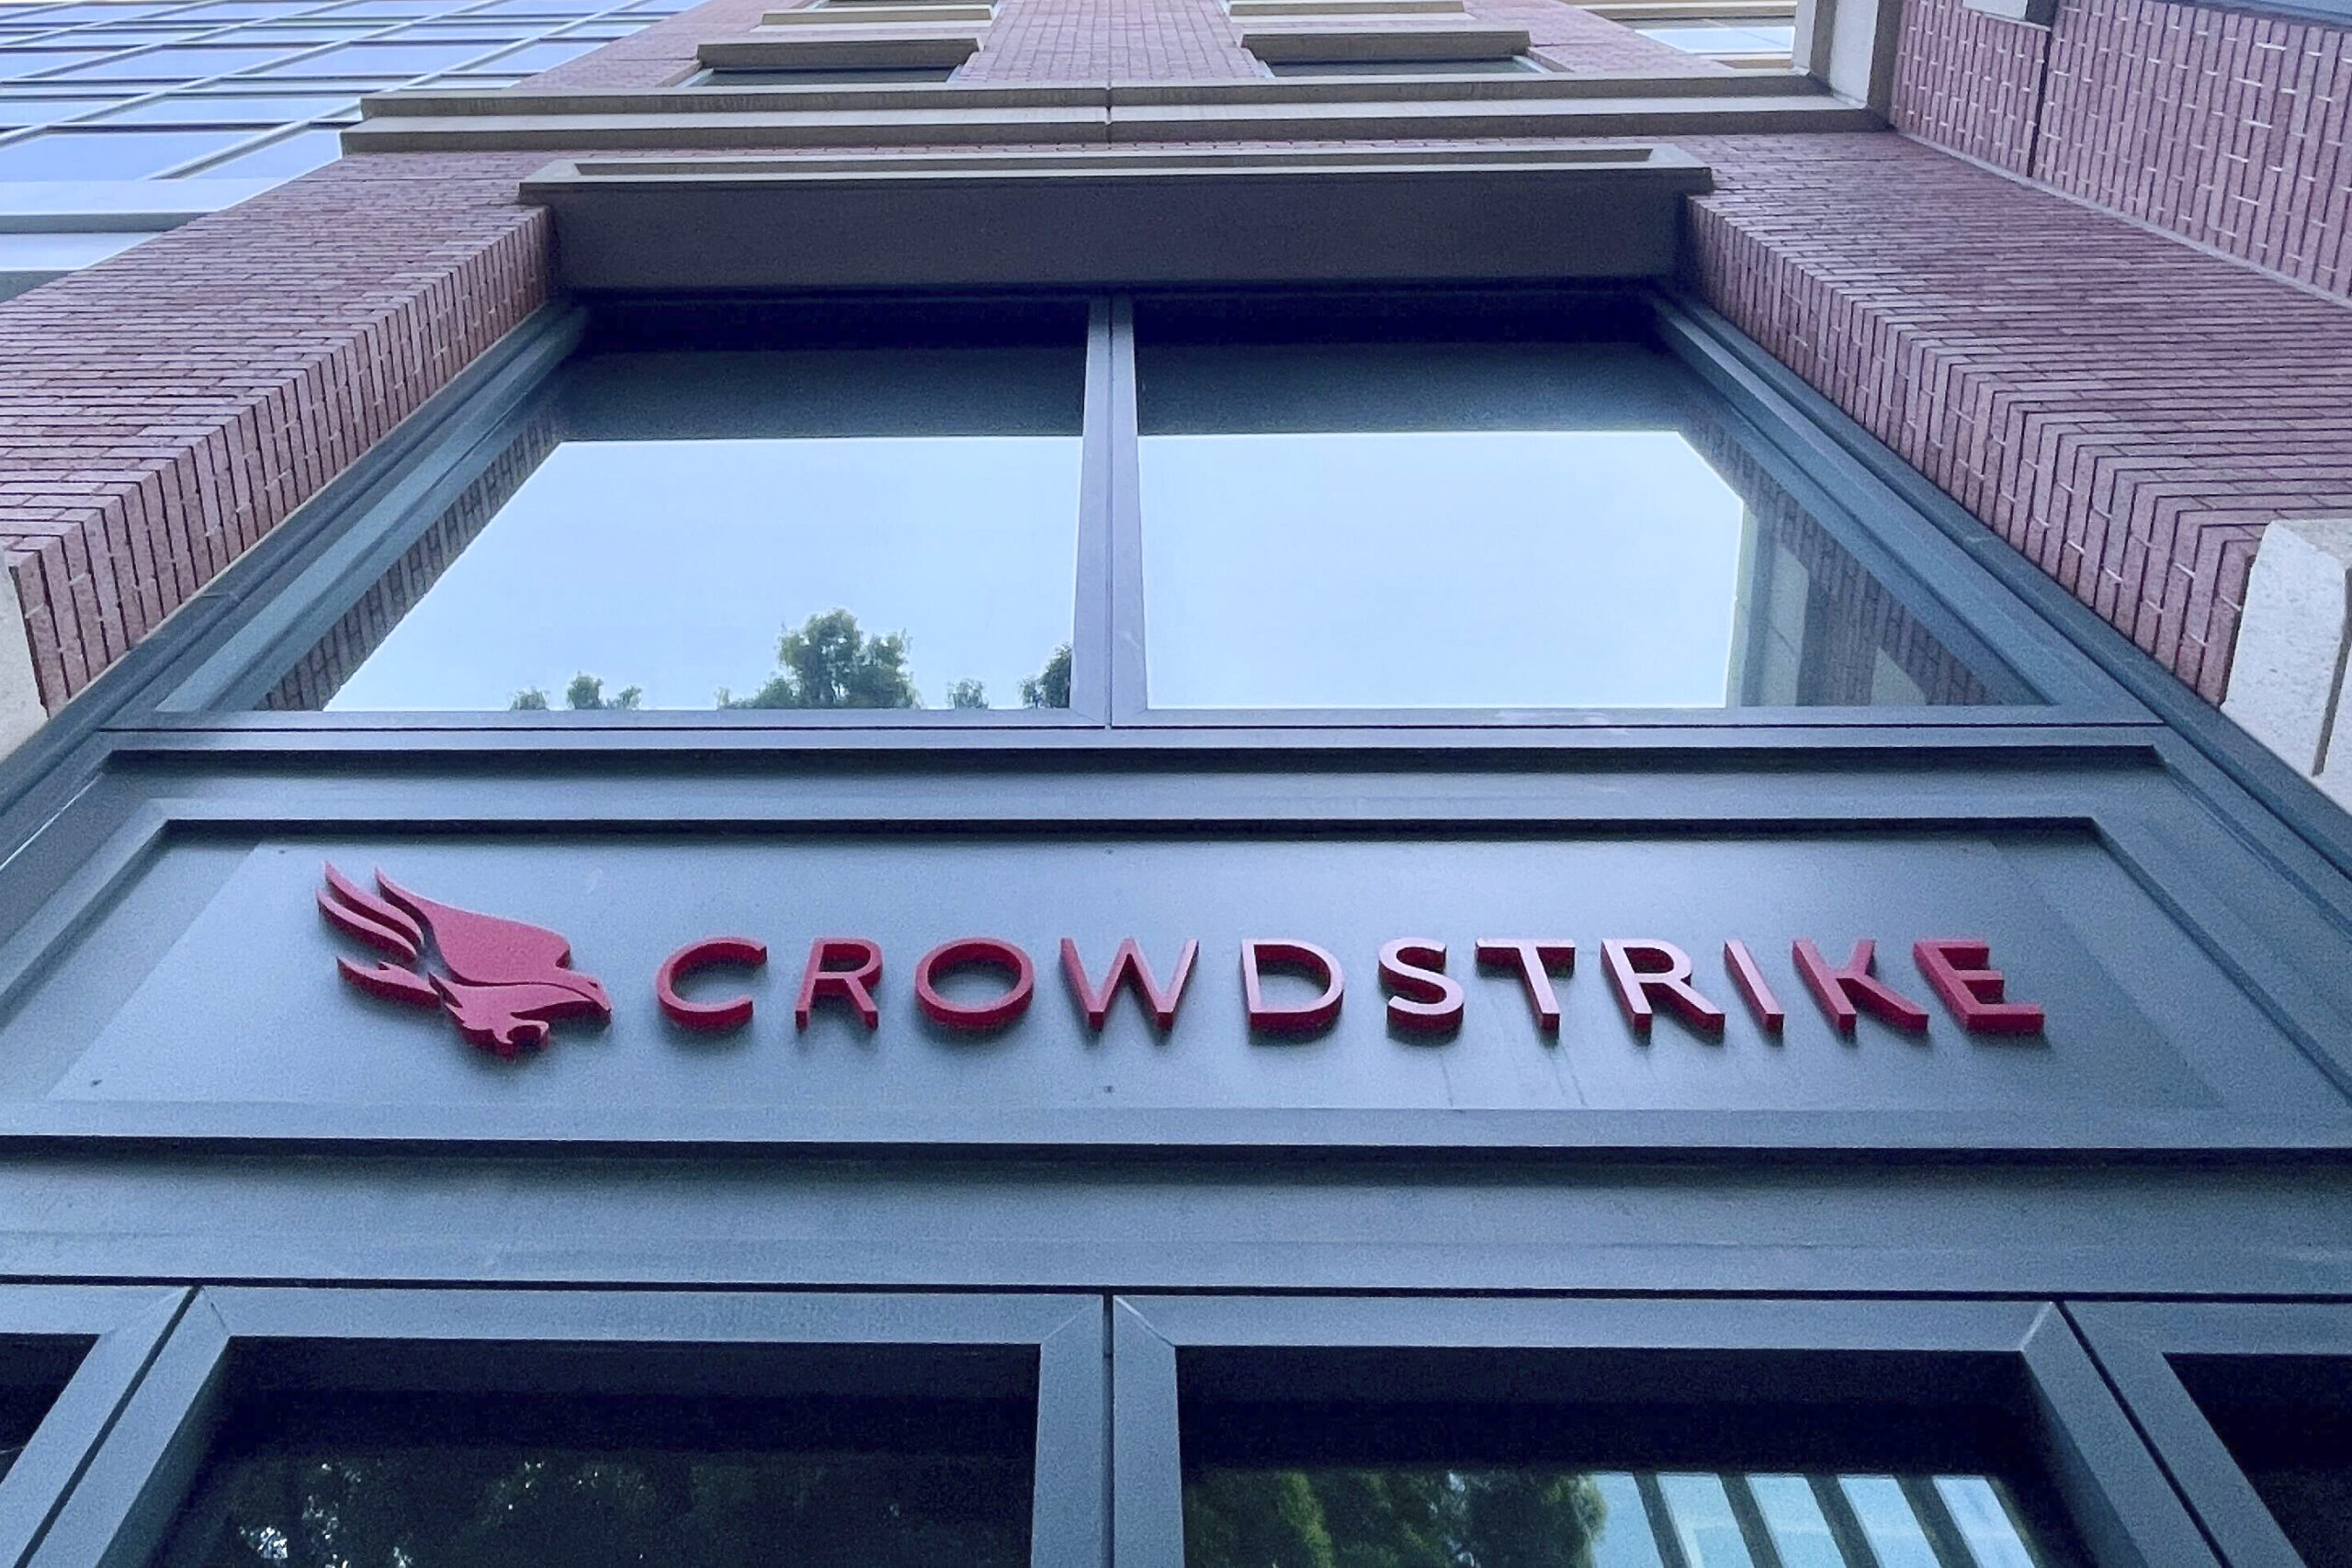 Wisconsin businesses see ripple effects of CrowdStrike tech outage